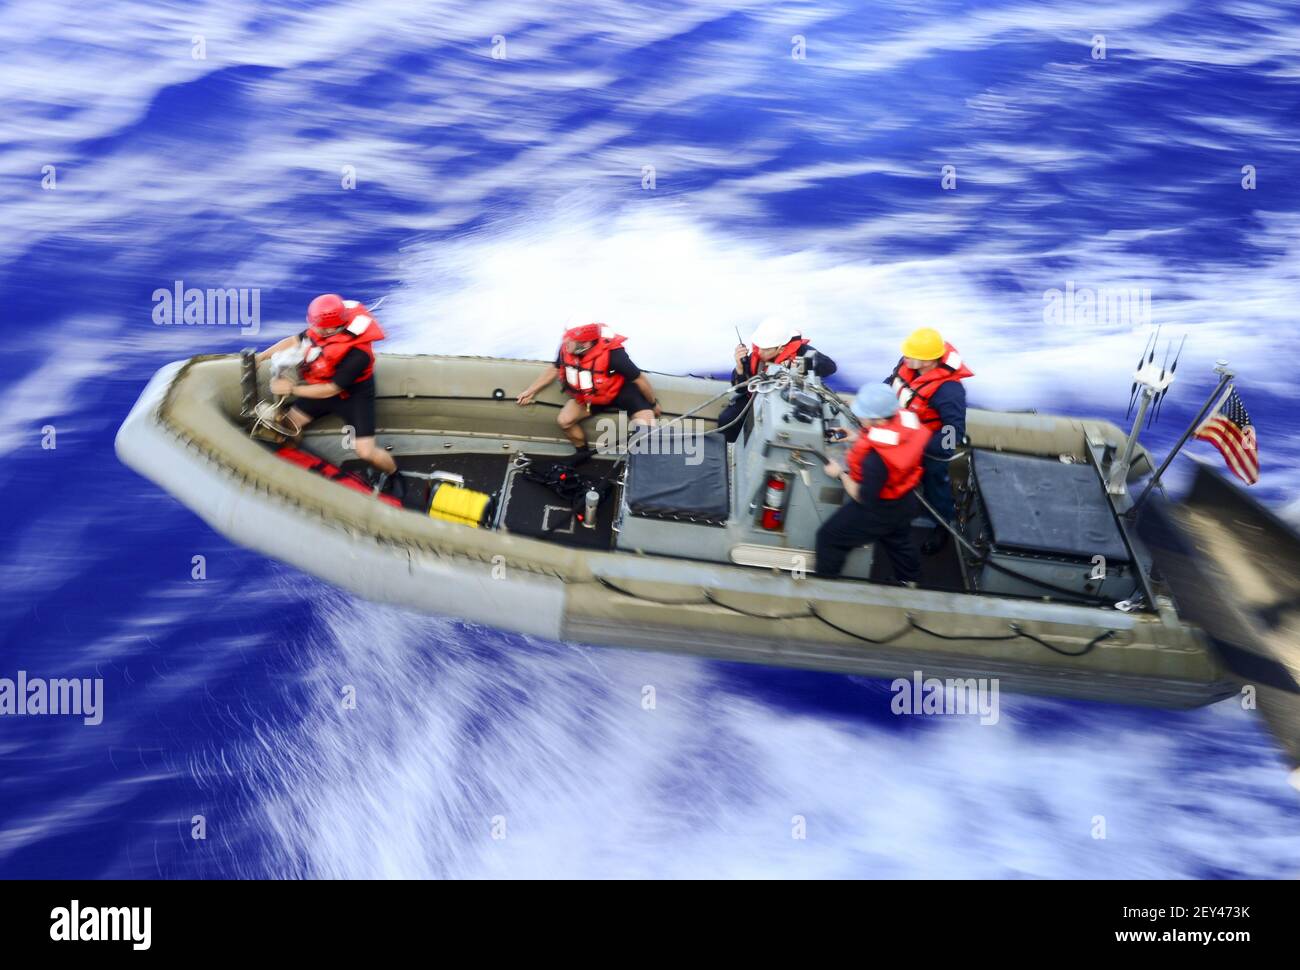 140913-N-GW139-057 PACIFIC OCEAN (Sept. 13, 2014) Sailors assigned to the guided-missile destroyer USS Sterett (DDG 104) pull away from the ship in a rigid-hull inflatable boat (RHIB). Sterett is underway in the U.S. 7th Fleet area of responsibility as part of the Carl Vinson Carrier Strike Group. Carl Vinson and its embarked air wing, Carrier Air Wing (CVW) 17, are on deployment in the U.S. 7th Fleet area of responsibility supporting security and stability in the Indo-Asia-Pacific region. (Photo by Mass Communication Specialist 3rd Class Eric Coffer/U.S. Navy/Sipa USA) Stock Photo